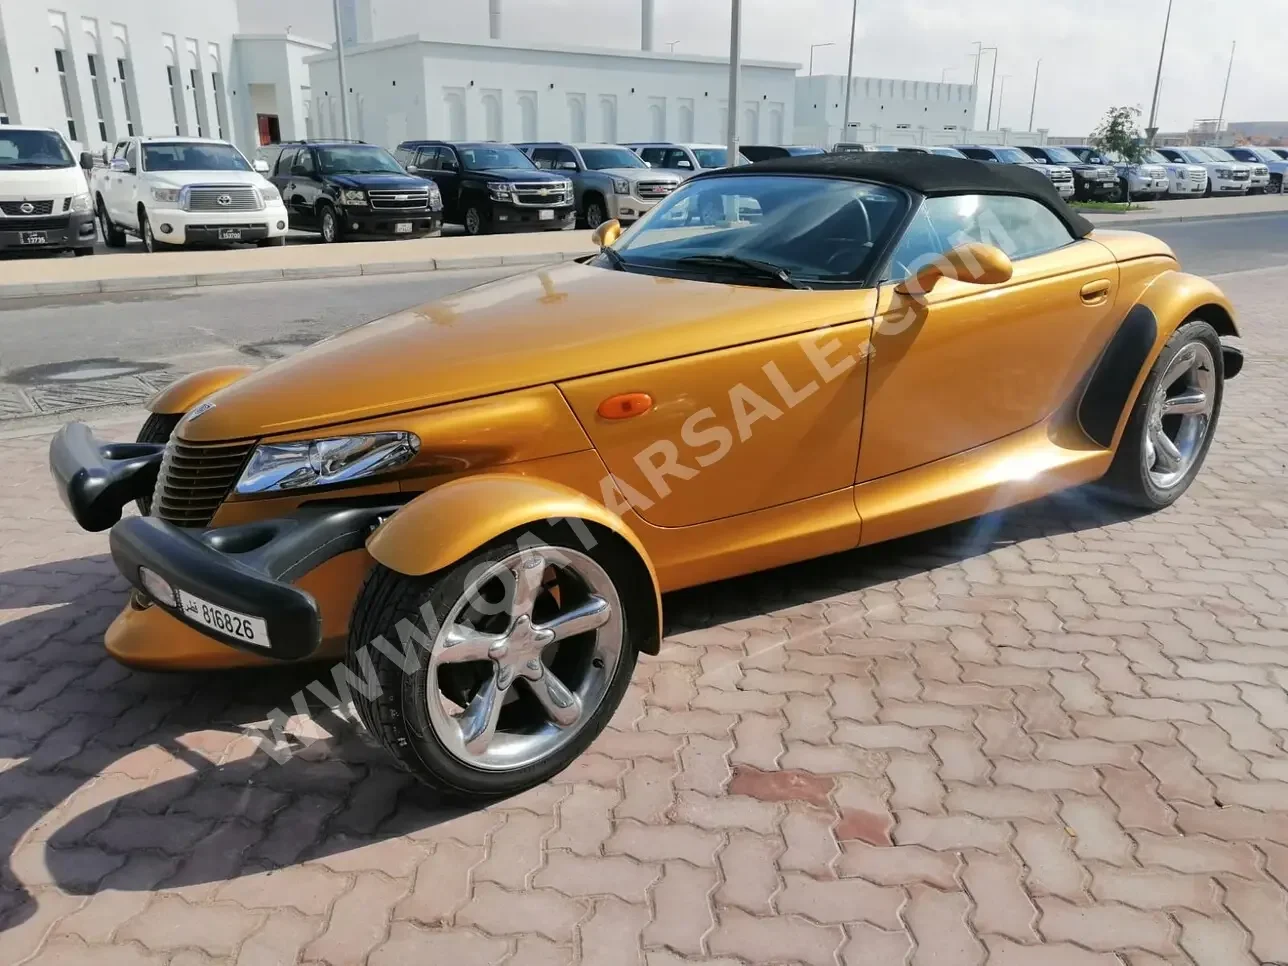 Chrysler  Prowler  2002  Automatic  6,500 Km  8 Cylinder  Rear Wheel Drive (RWD)  Convertible  Gold